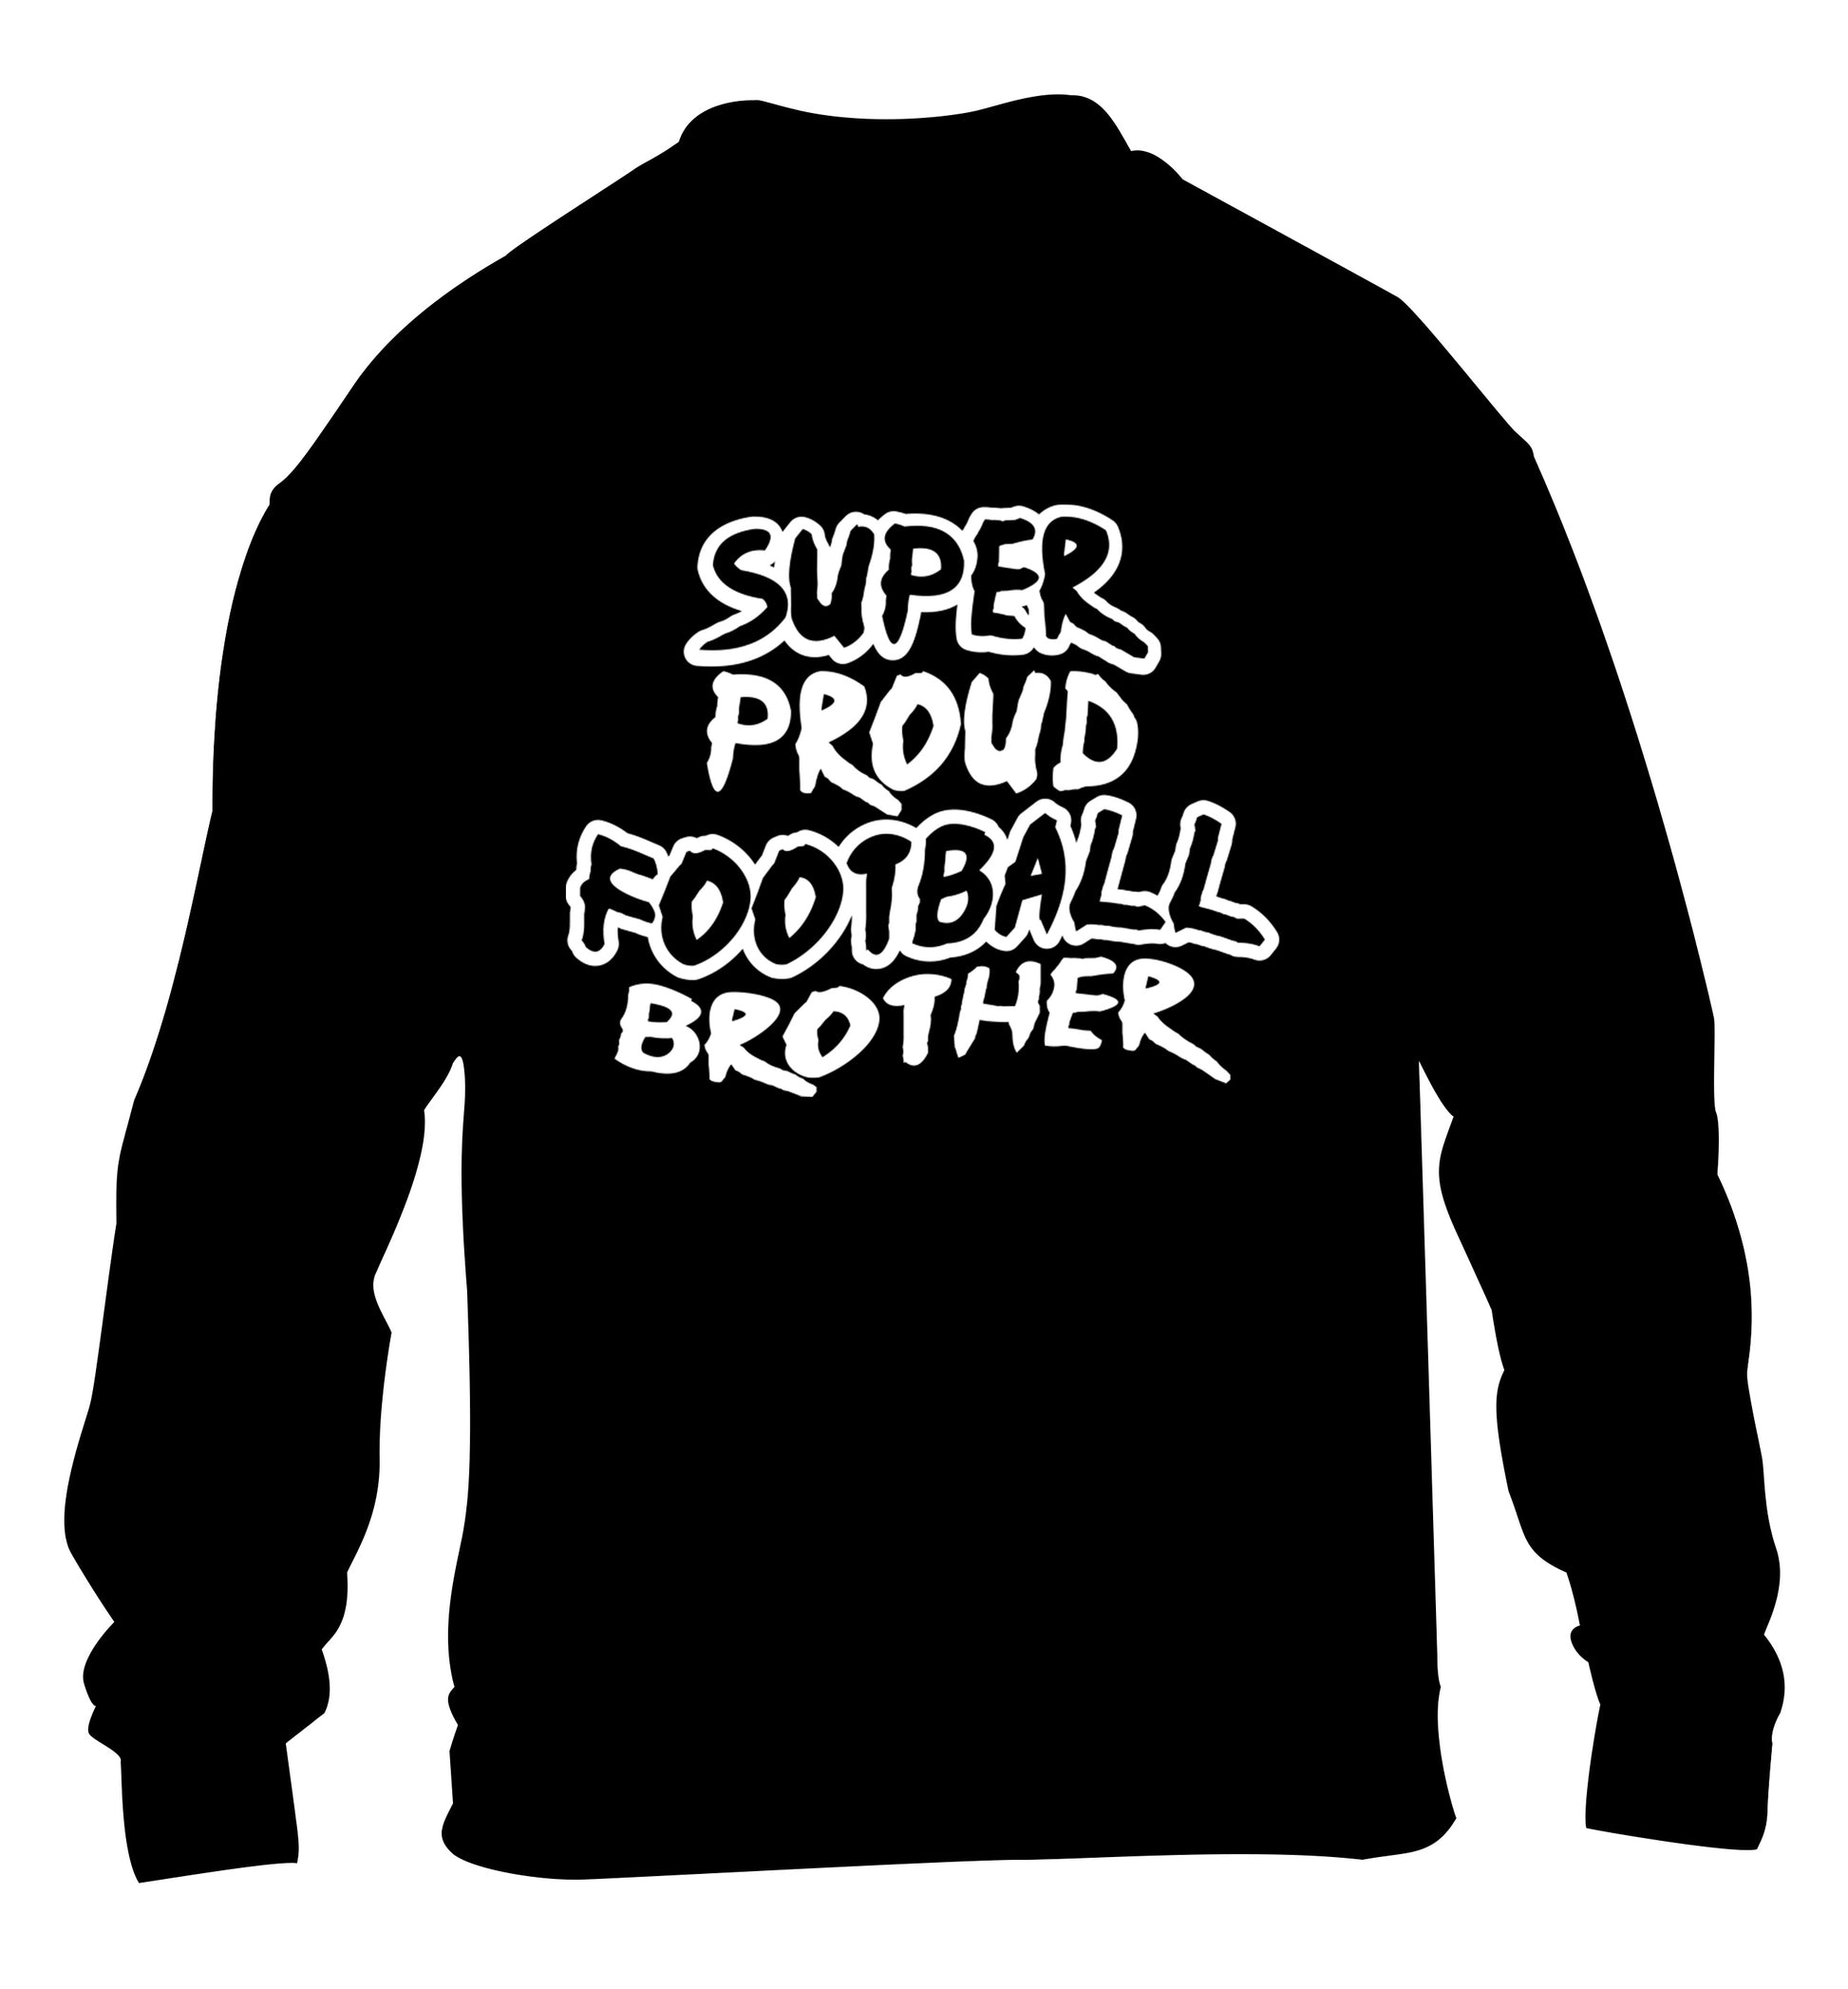 Super proud football brother children's black sweater 12-14 Years